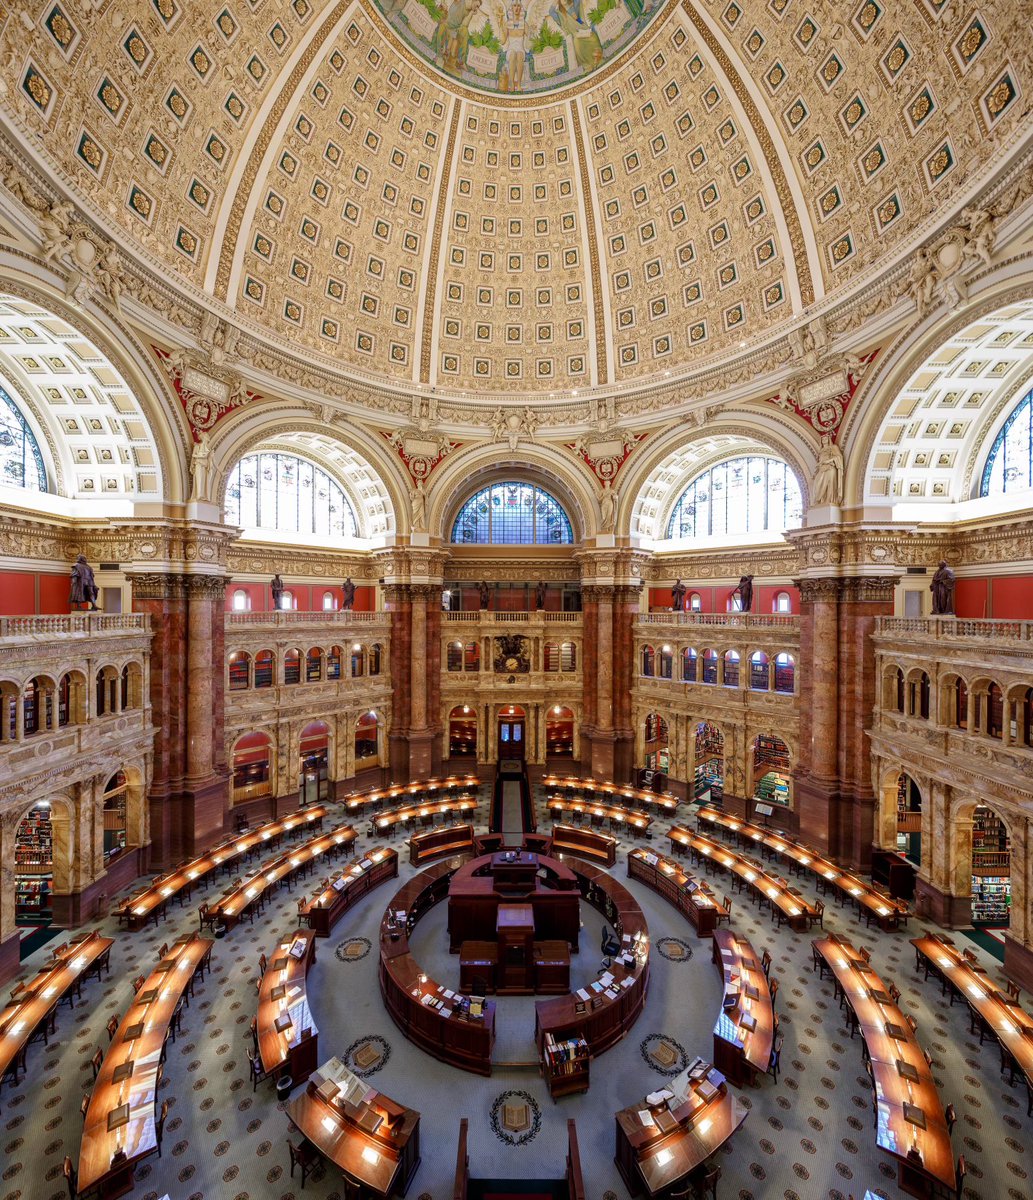 Happy 224th Birthday to the @librarycongress! For more than two centuries, we have been dedicated to collecting, preserving and sharing America’s treasures for generations to use. We are committed in serving our users because the Library of Congress is a library for ALL.